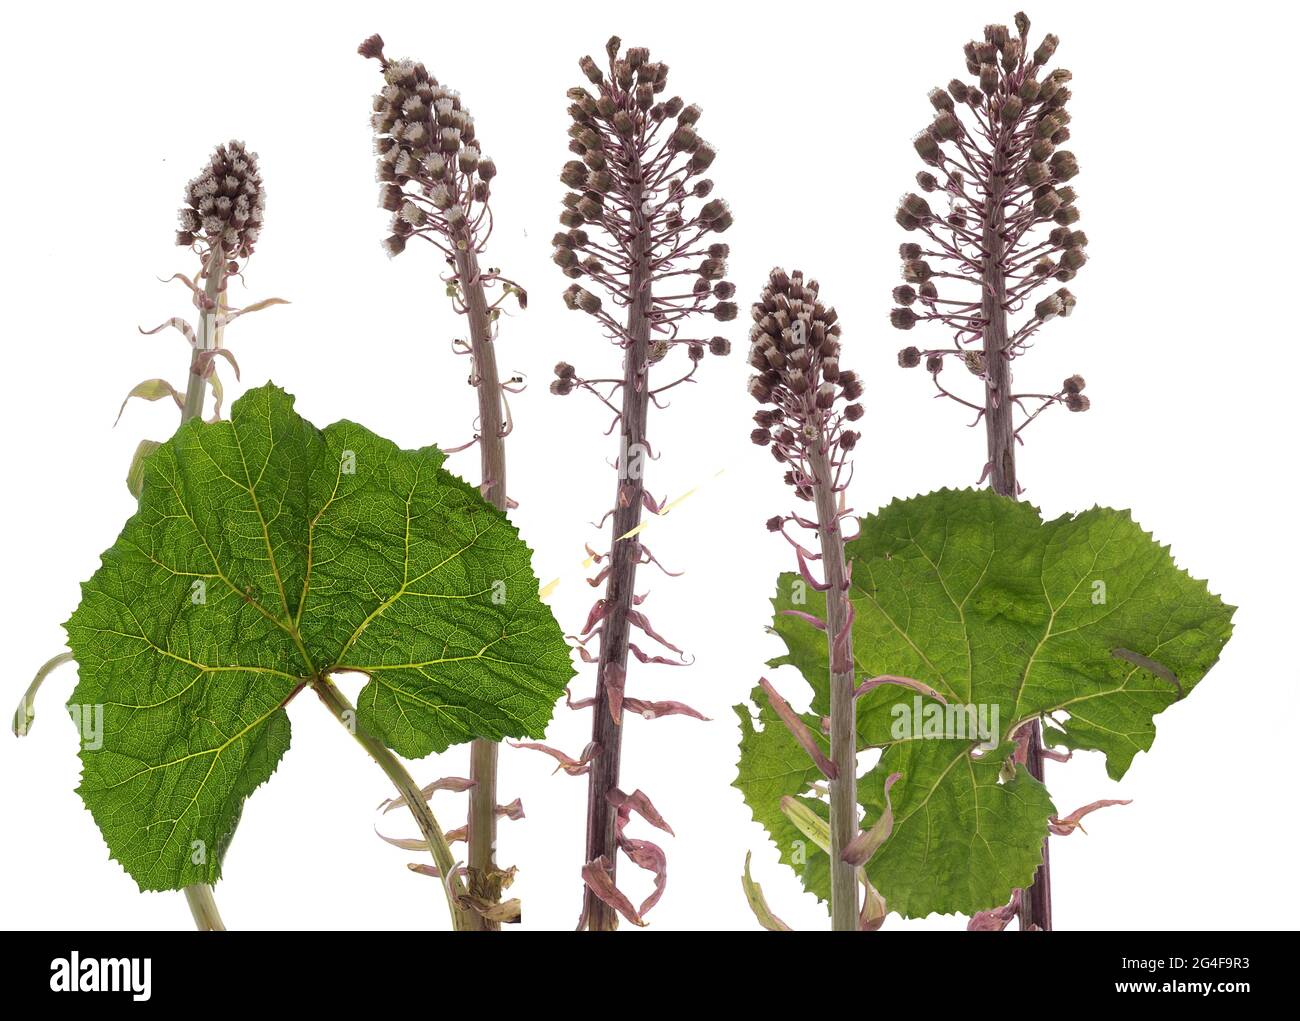 Flowers of a common butterbur (Petasites hybridus) on a white background, Germany Stock Photo